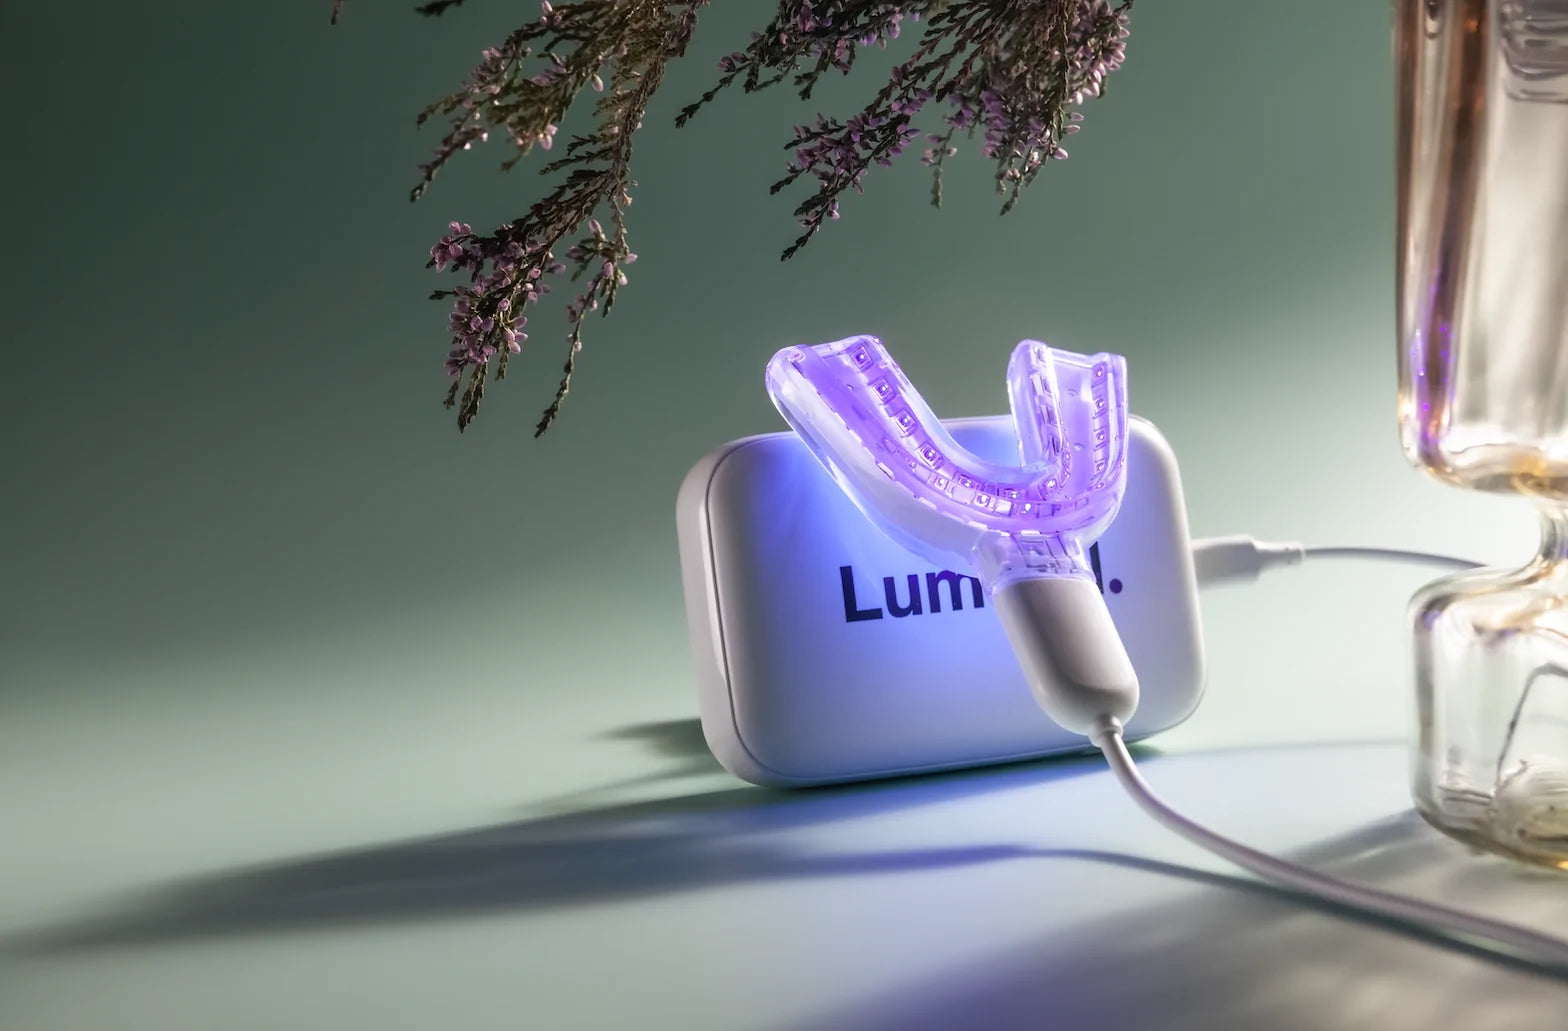 Finnish health tech company Koite Health expands to Germany, signs Lumoral® accord with German expert in dental education